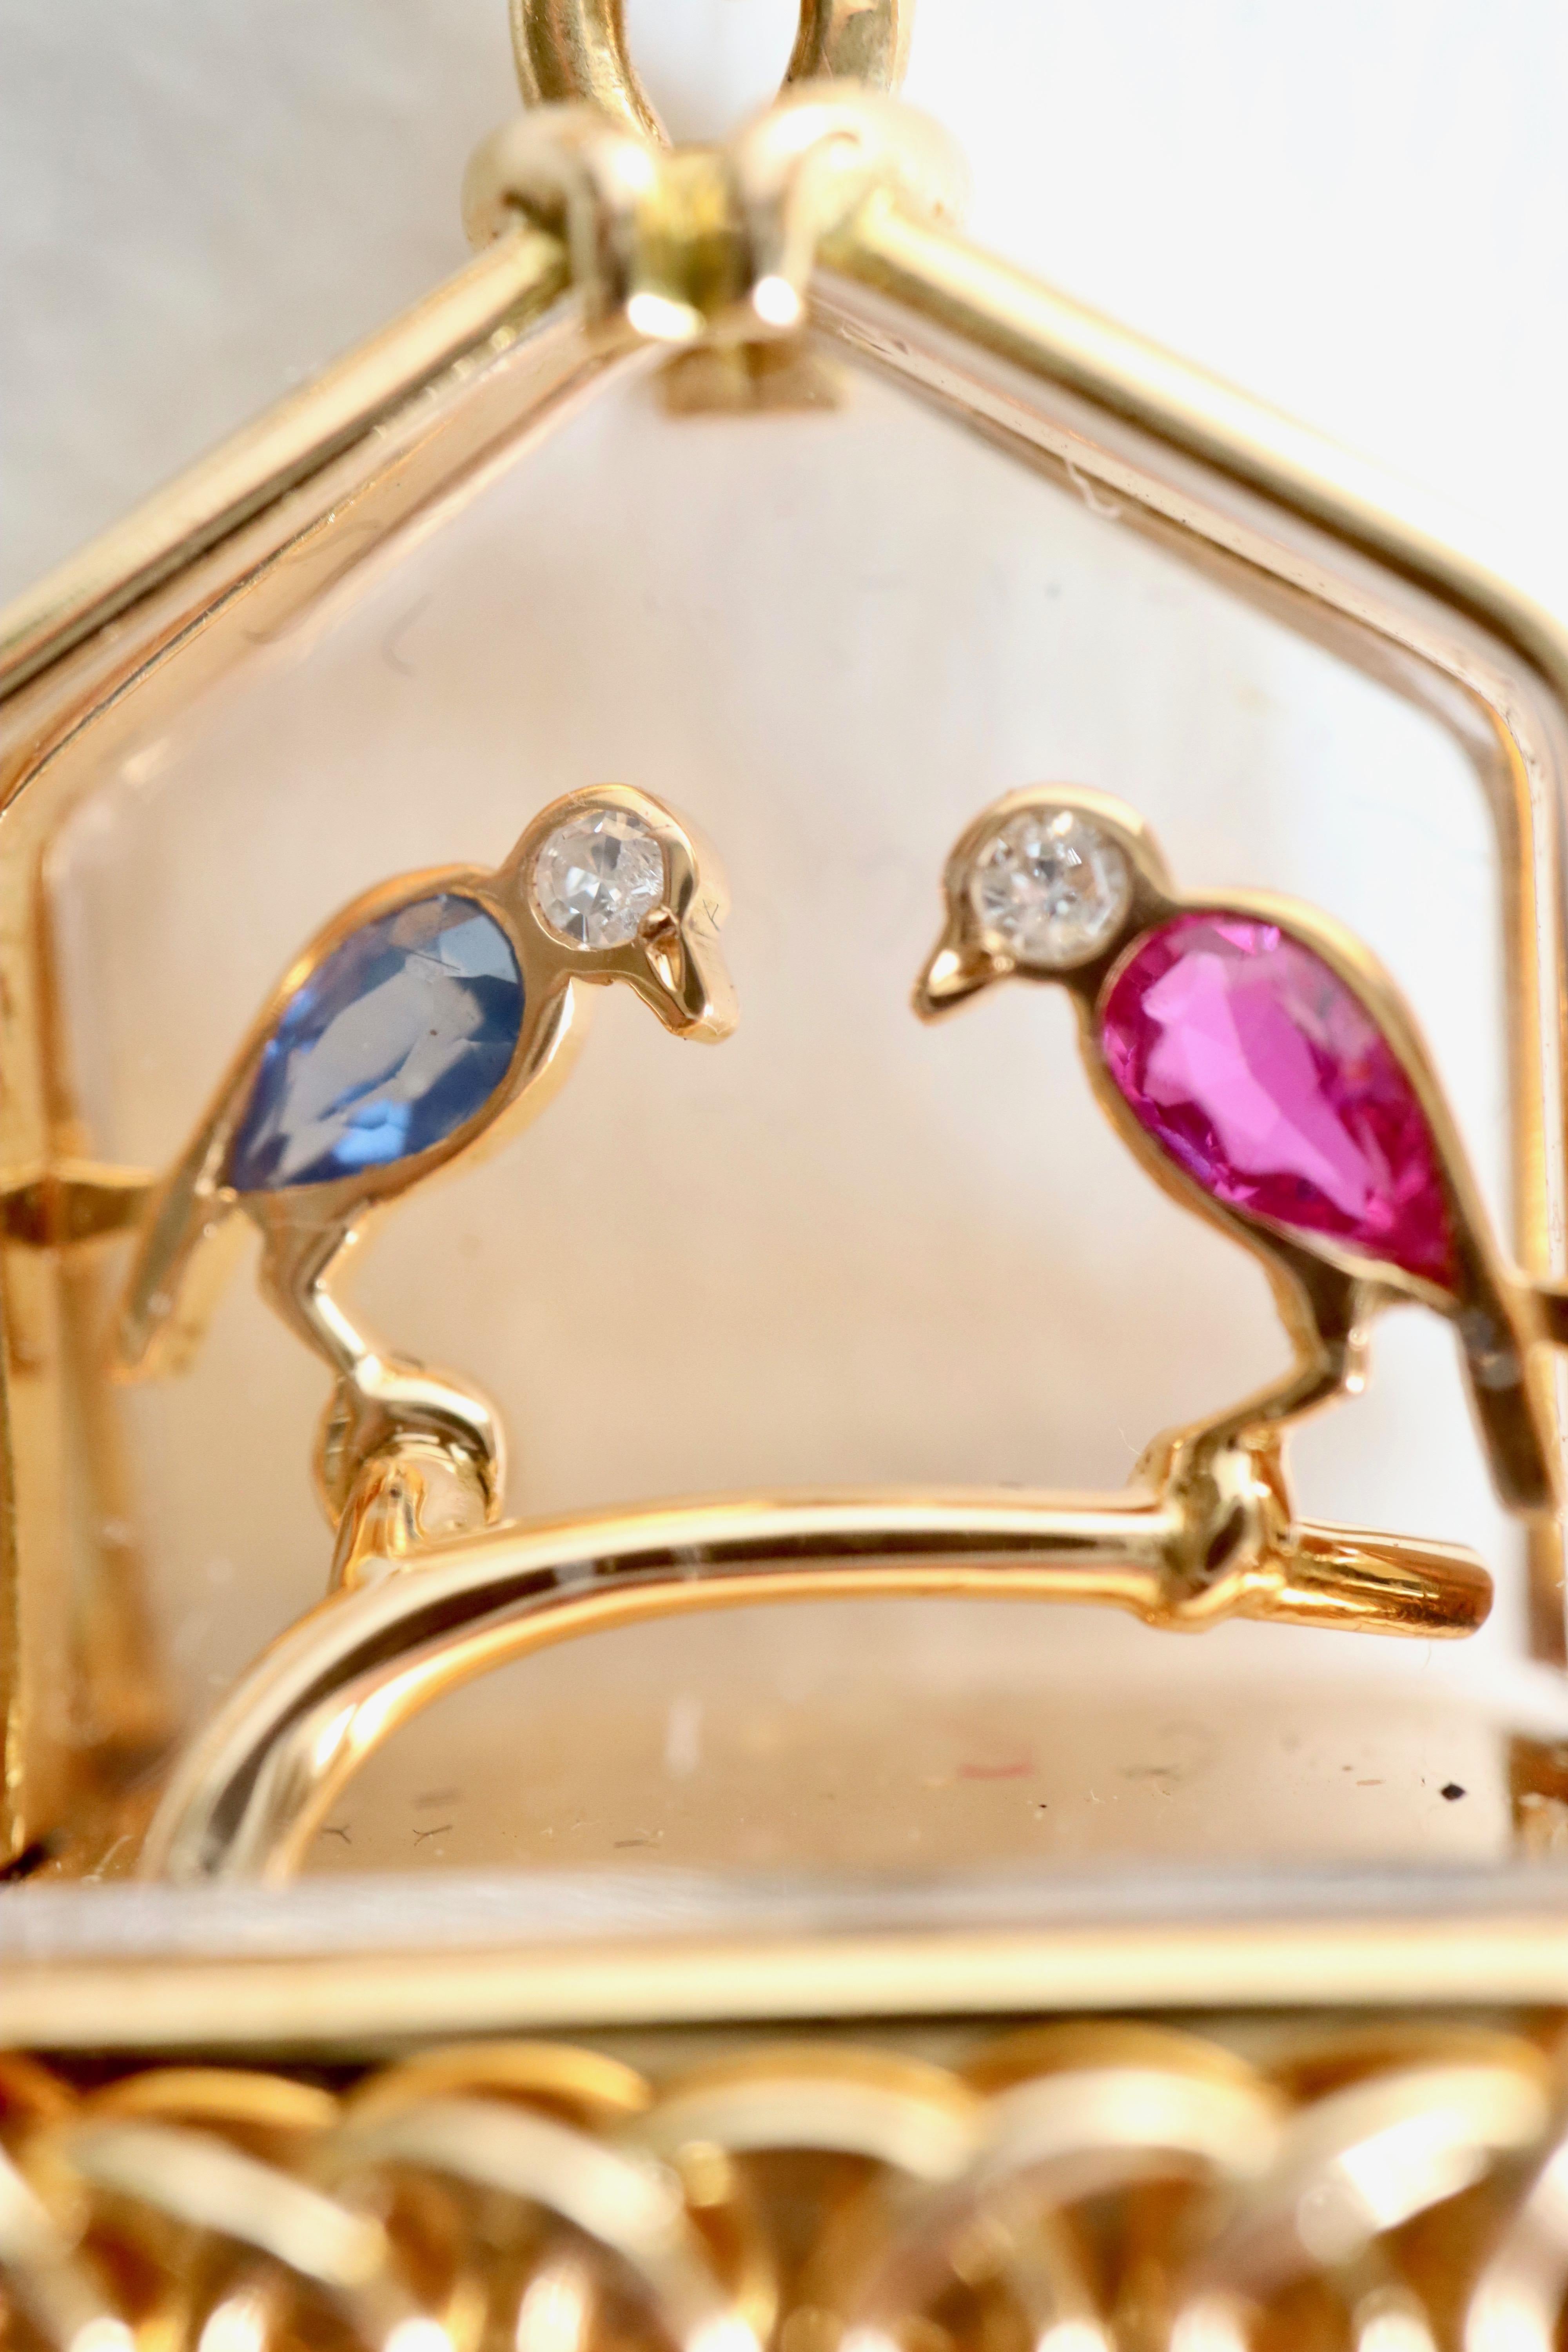 UTI Watch Caged Birds Brooch in 18 Carat Gold circa 1950 Ruby Sapphire Diamonds For Sale 1